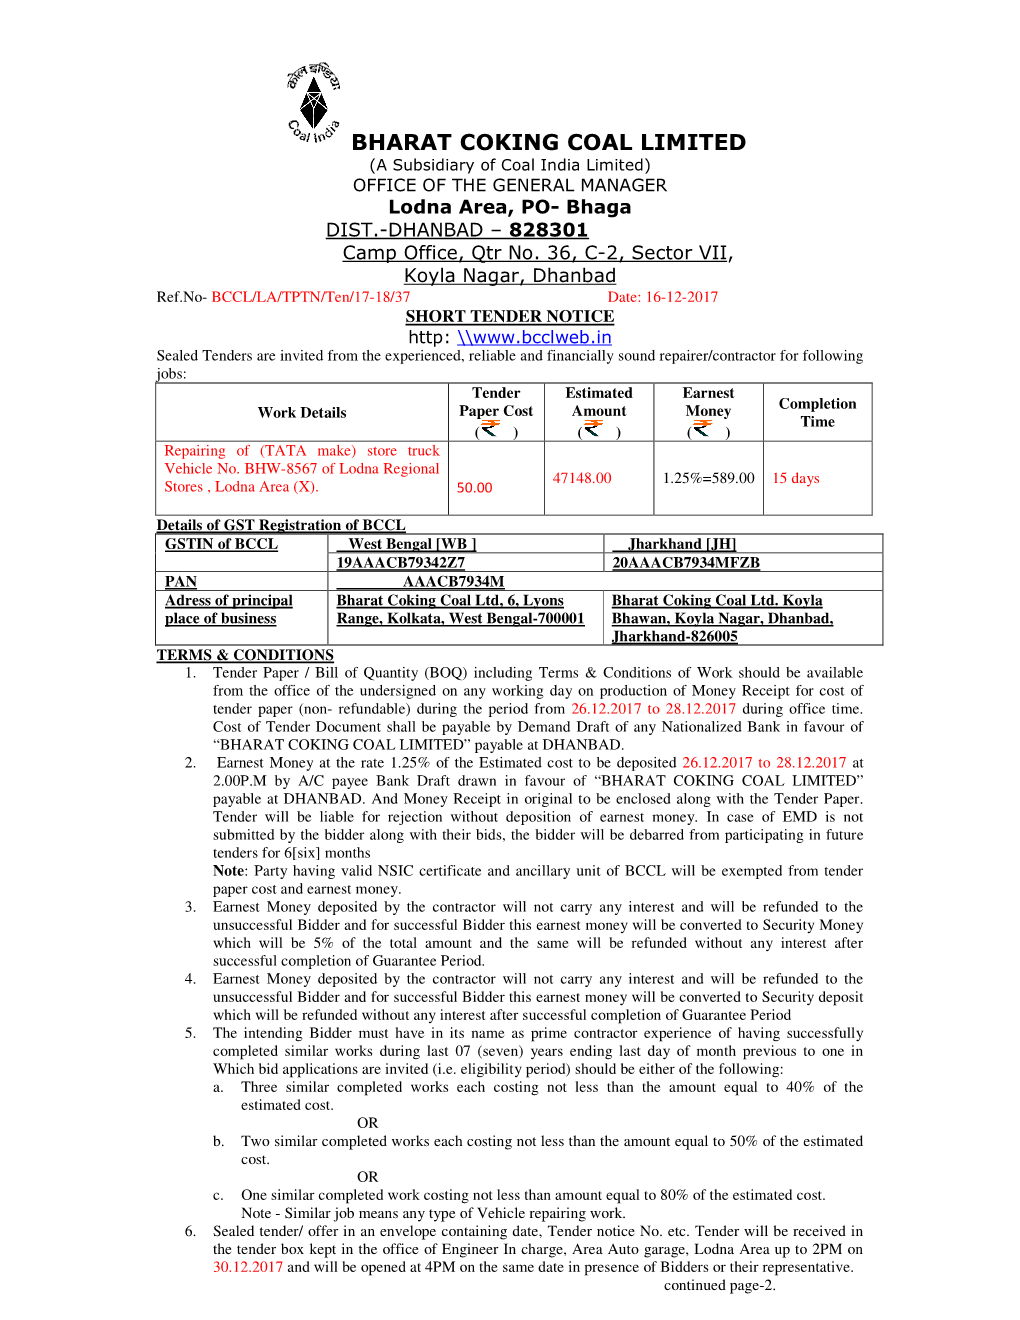 BHARAT COKING COAL LIMITED (A Subsidiary of Coal India Limited) OFFICE of the GENERAL MANAGER Lodna Area, PO- Bhaga DIST.-DHANBAD – 828301 Camp Office, Qtr No